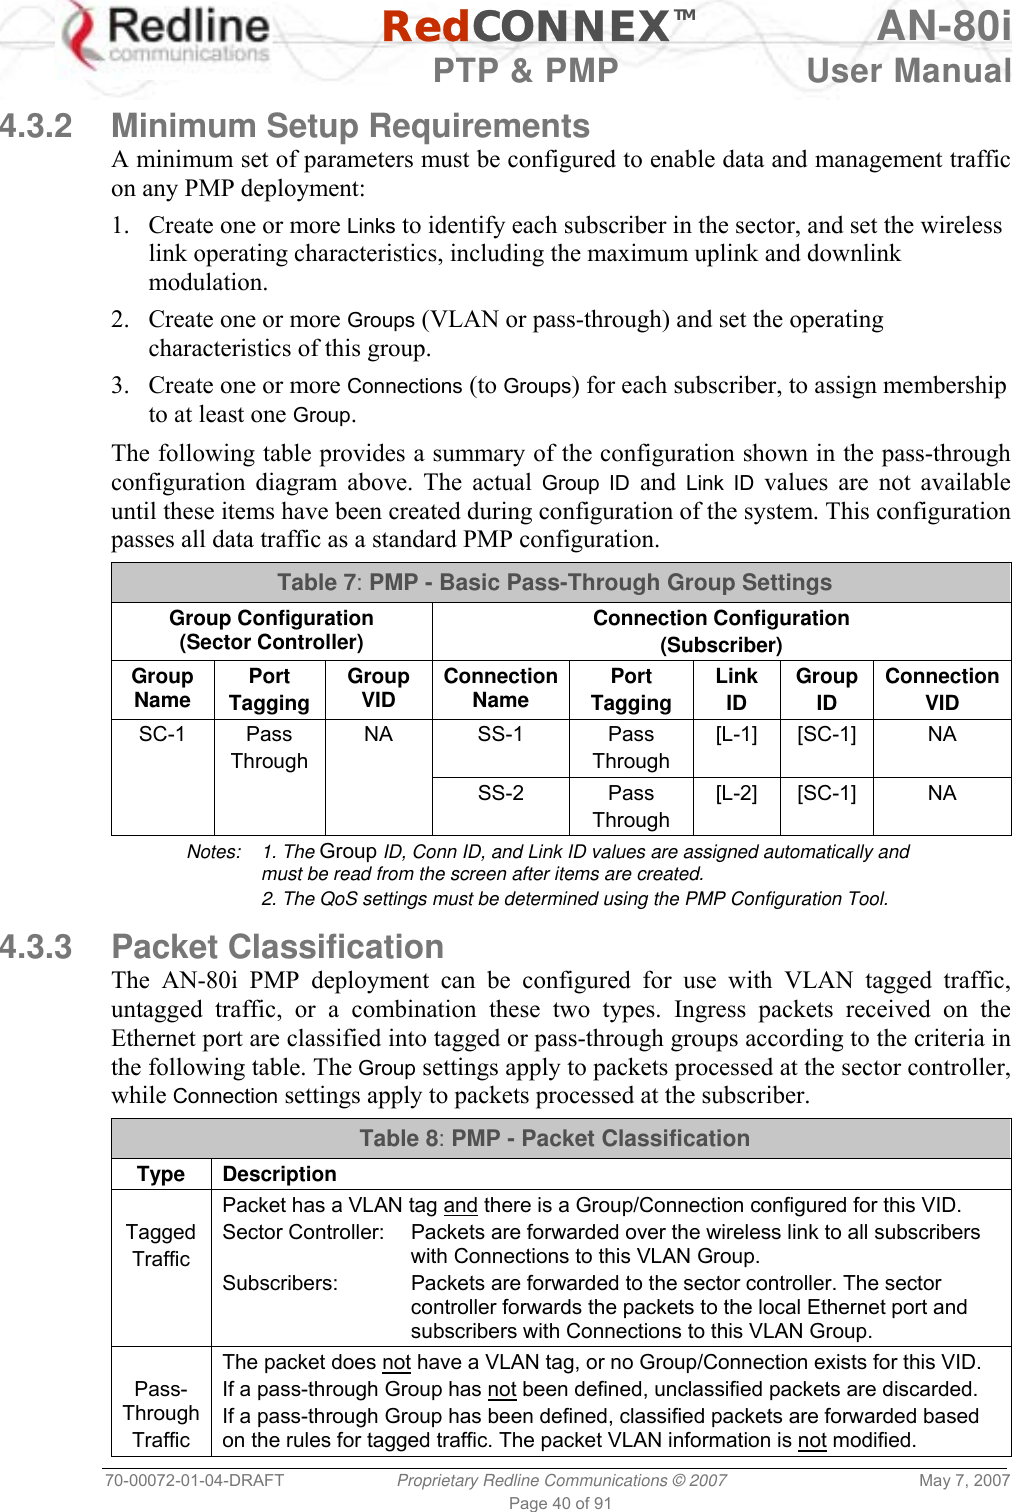   RedCONNEXTM AN-80i   PTP &amp; PMP  User Manual 70-00072-01-04-DRAFT  Proprietary Redline Communications © 2007  May 7, 2007 Page 40 of 91  4.3.2  Minimum Setup Requirements A minimum set of parameters must be configured to enable data and management traffic on any PMP deployment:  1.  Create one or more Links to identify each subscriber in the sector, and set the wireless link operating characteristics, including the maximum uplink and downlink modulation. 2.  Create one or more Groups (VLAN or pass-through) and set the operating characteristics of this group. 3.  Create one or more Connections (to Groups) for each subscriber, to assign membership to at least one Group.  The following table provides a summary of the configuration shown in the pass-through configuration diagram above. The actual Group ID and Link ID values are not available until these items have been created during configuration of the system. This configuration passes all data traffic as a standard PMP configuration.  Table 7: PMP - Basic Pass-Through Group Settings Group Configuration (Sector Controller)  Connection Configuration (Subscriber) Group Name  Port Tagging Group VID  Connection Name  Port Tagging Link ID Group ID ConnectionVID SC-1 Pass Through NA SS-1 Pass Through [L-1] [SC-1]  NA    SS-2 Pass Through [L-2] [SC-1]  NA Notes: 1. The Group ID, Conn ID, and Link ID values are assigned automatically and must be read from the screen after items are created.   2. The QoS settings must be determined using the PMP Configuration Tool.  4.3.3 Packet Classification The AN-80i PMP deployment can be configured for use with VLAN tagged traffic, untagged traffic, or a combination these two types. Ingress packets received on the Ethernet port are classified into tagged or pass-through groups according to the criteria in the following table. The Group settings apply to packets processed at the sector controller, while Connection settings apply to packets processed at the subscriber. Table 8: PMP - Packet Classification Type Description  Tagged Traffic Packet has a VLAN tag and there is a Group/Connection configured for this VID. Sector Controller:  Packets are forwarded over the wireless link to all subscribers with Connections to this VLAN Group. Subscribers: Packets are forwarded to the sector controller. The sector controller forwards the packets to the local Ethernet port and subscribers with Connections to this VLAN Group.  Pass-Through Traffic The packet does not have a VLAN tag, or no Group/Connection exists for this VID.  If a pass-through Group has not been defined, unclassified packets are discarded. If a pass-through Group has been defined, classified packets are forwarded based on the rules for tagged traffic. The packet VLAN information is not modified.  